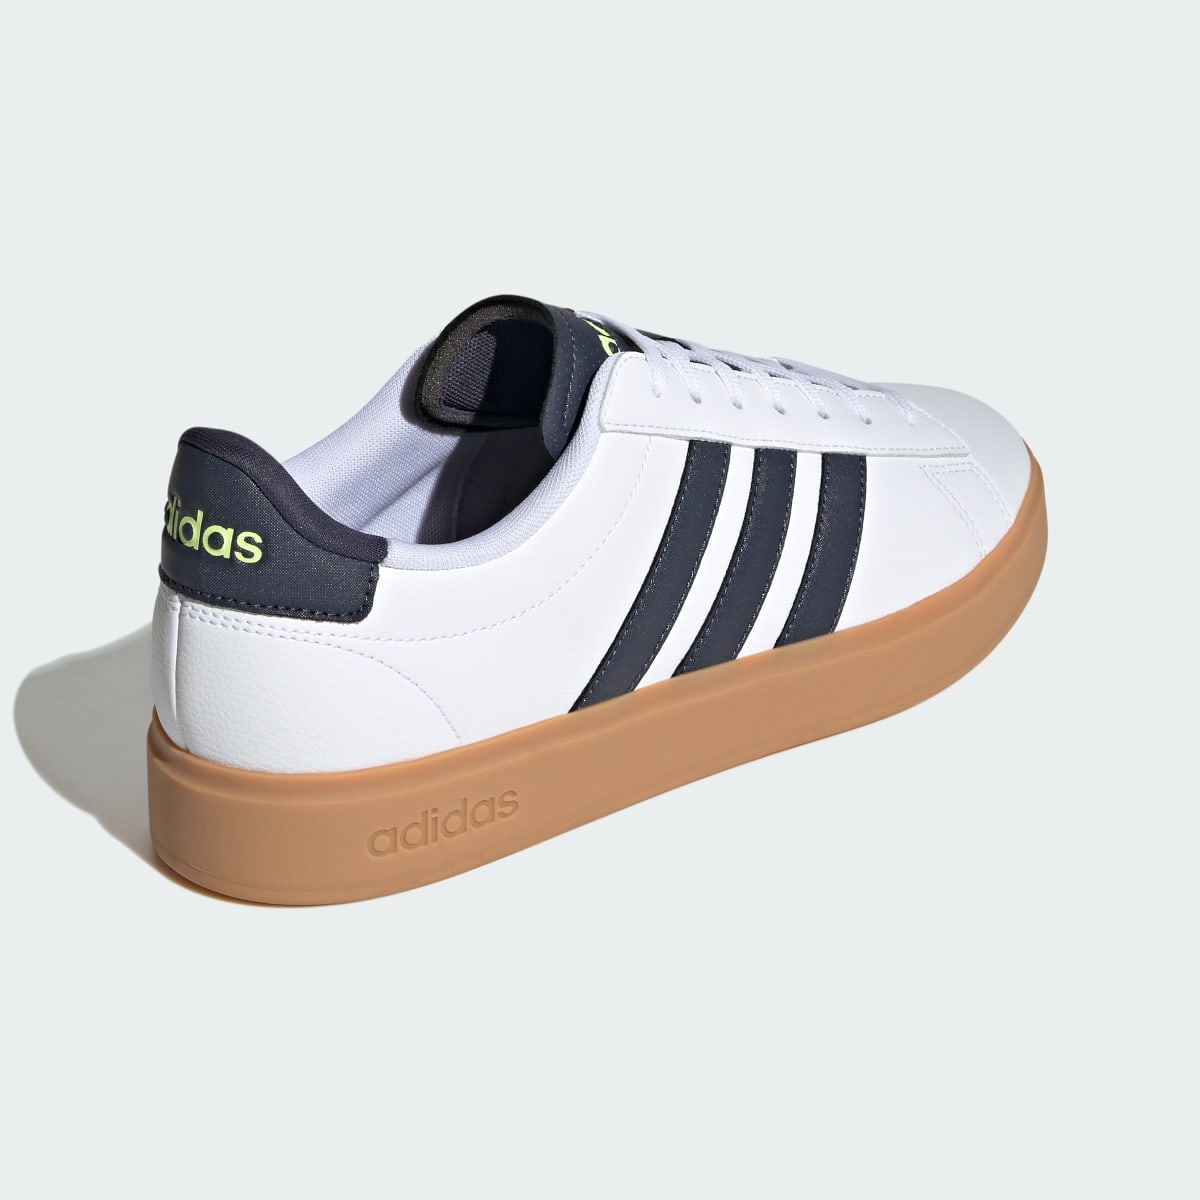 Adidas Grand Court 2.0 Shoes. 4